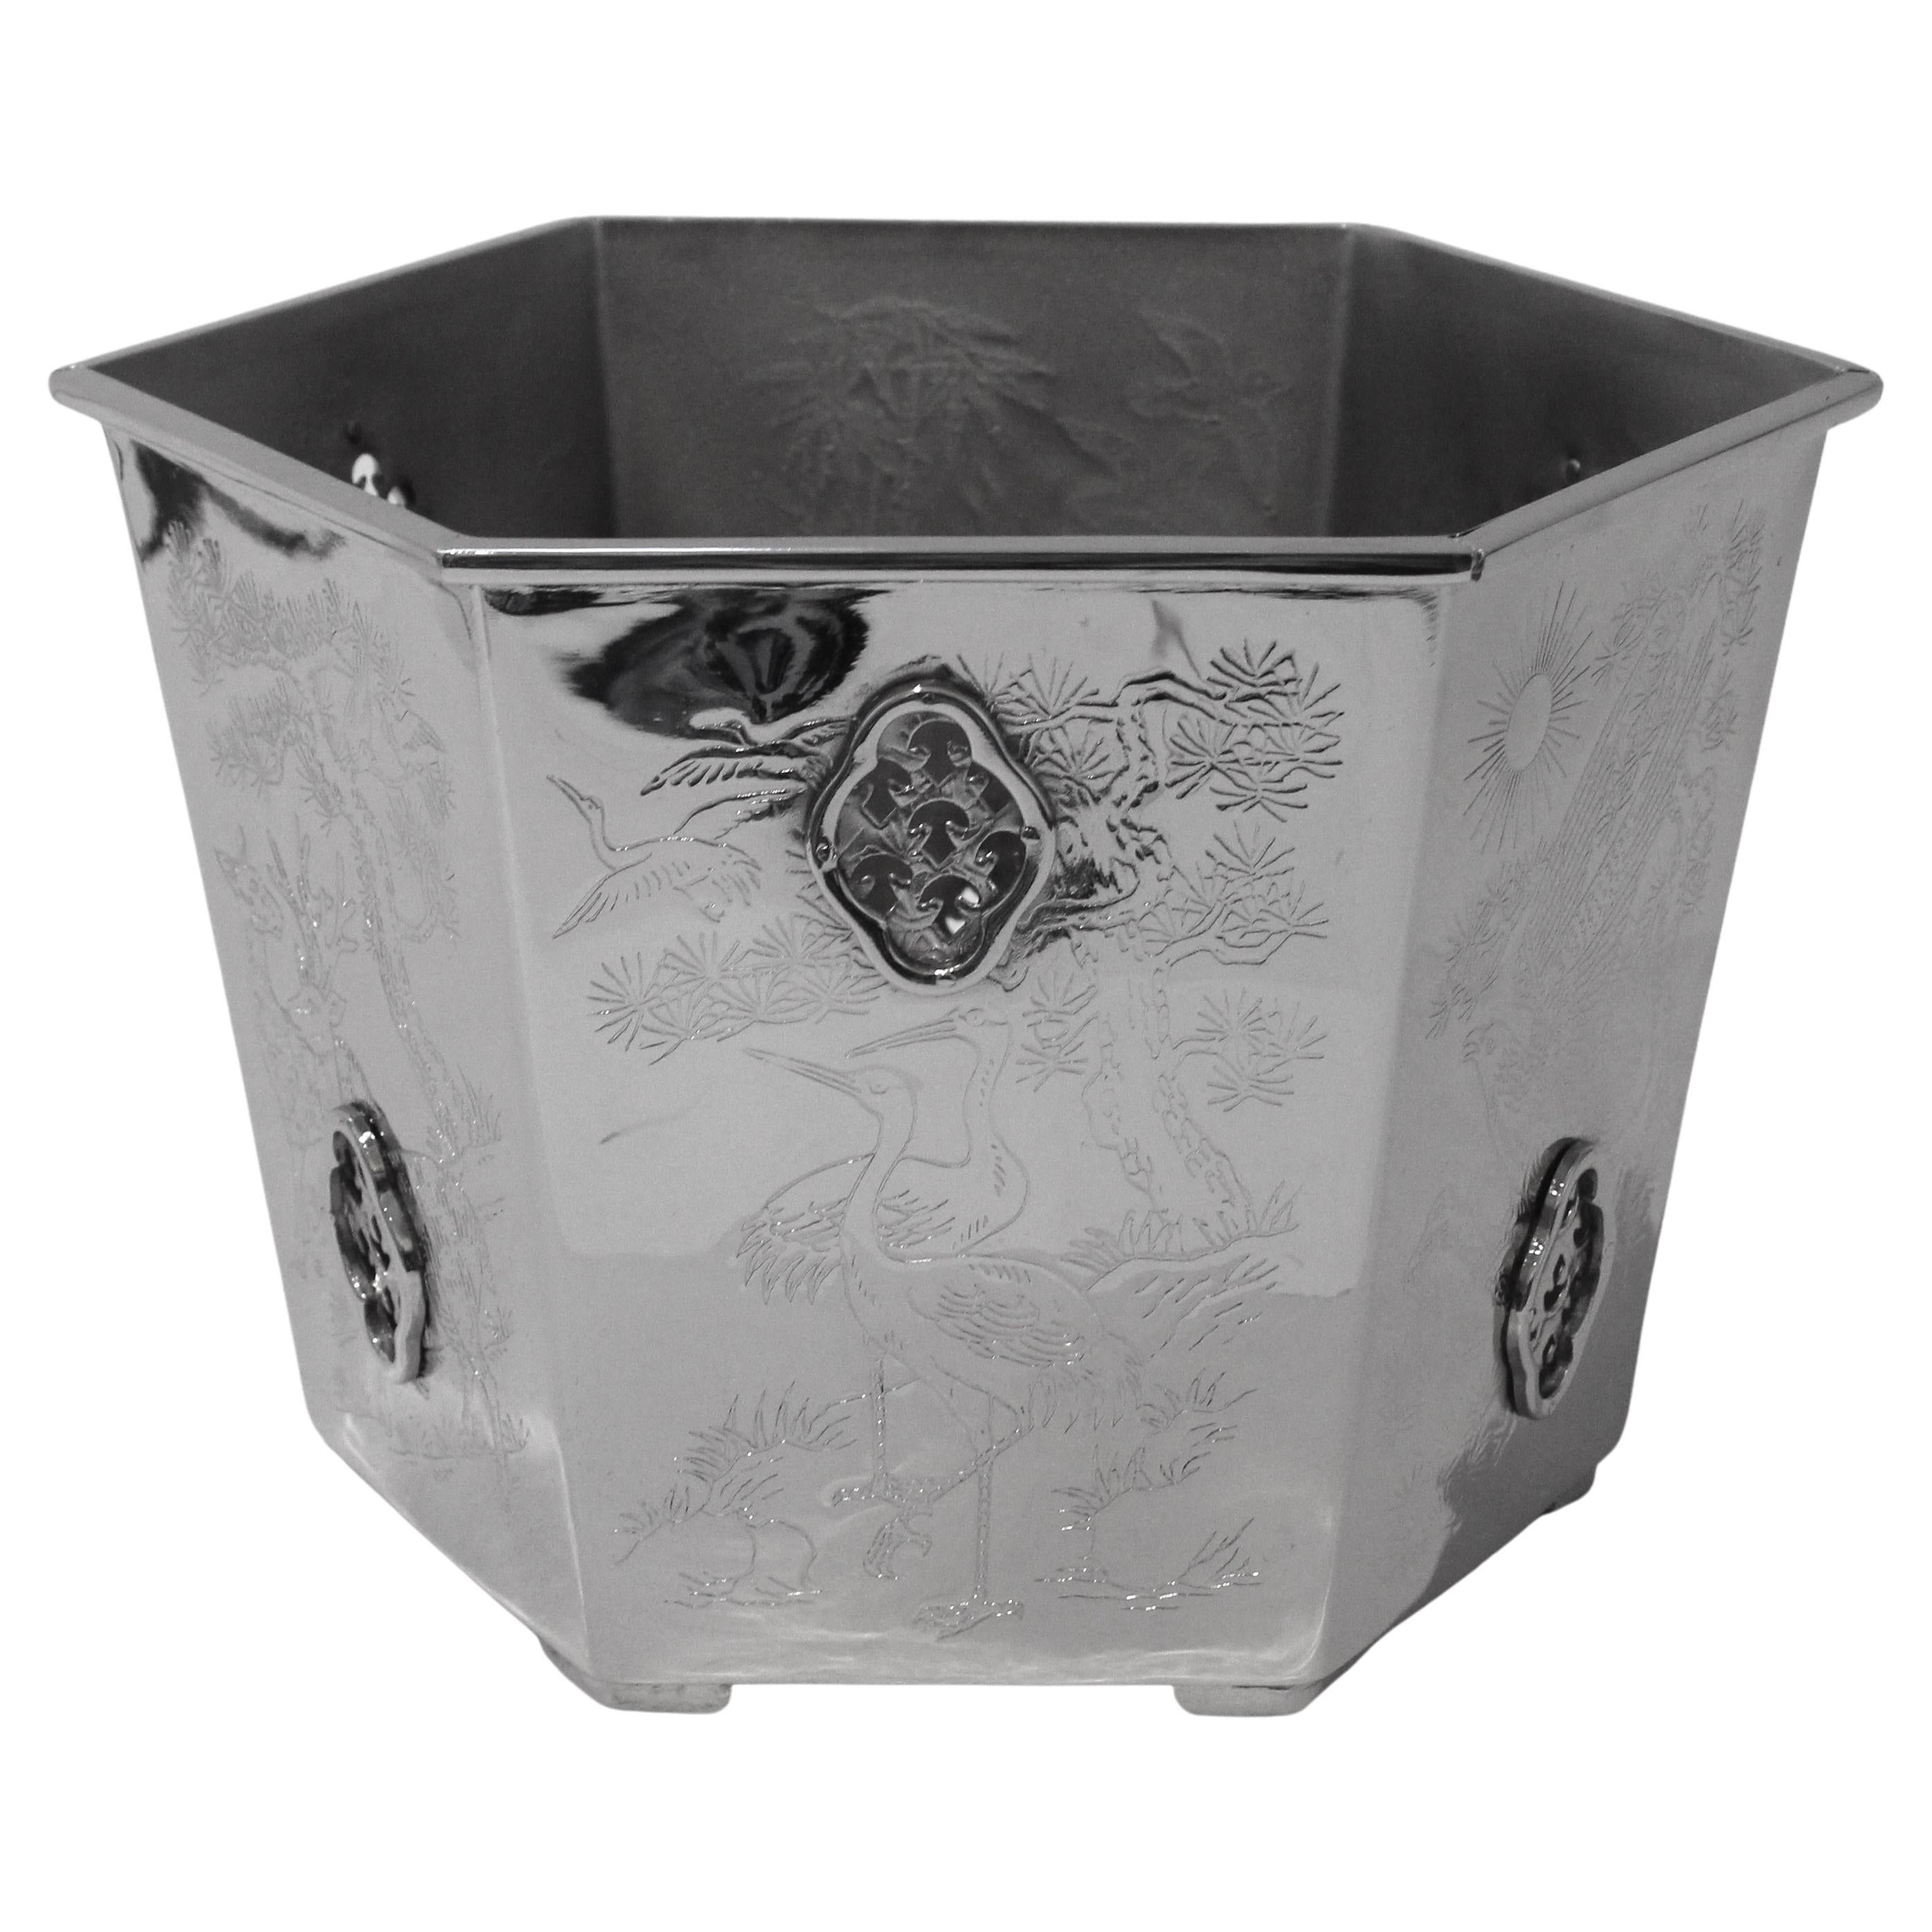 This stylish and chic nickel plated cachepot originally dates to the 1960s and has recently been plated in nickel for a fresh modern look.

The hexagonal shape is detailed with pierced cartouches and idyllic asian scenes. 

Note: The pierced